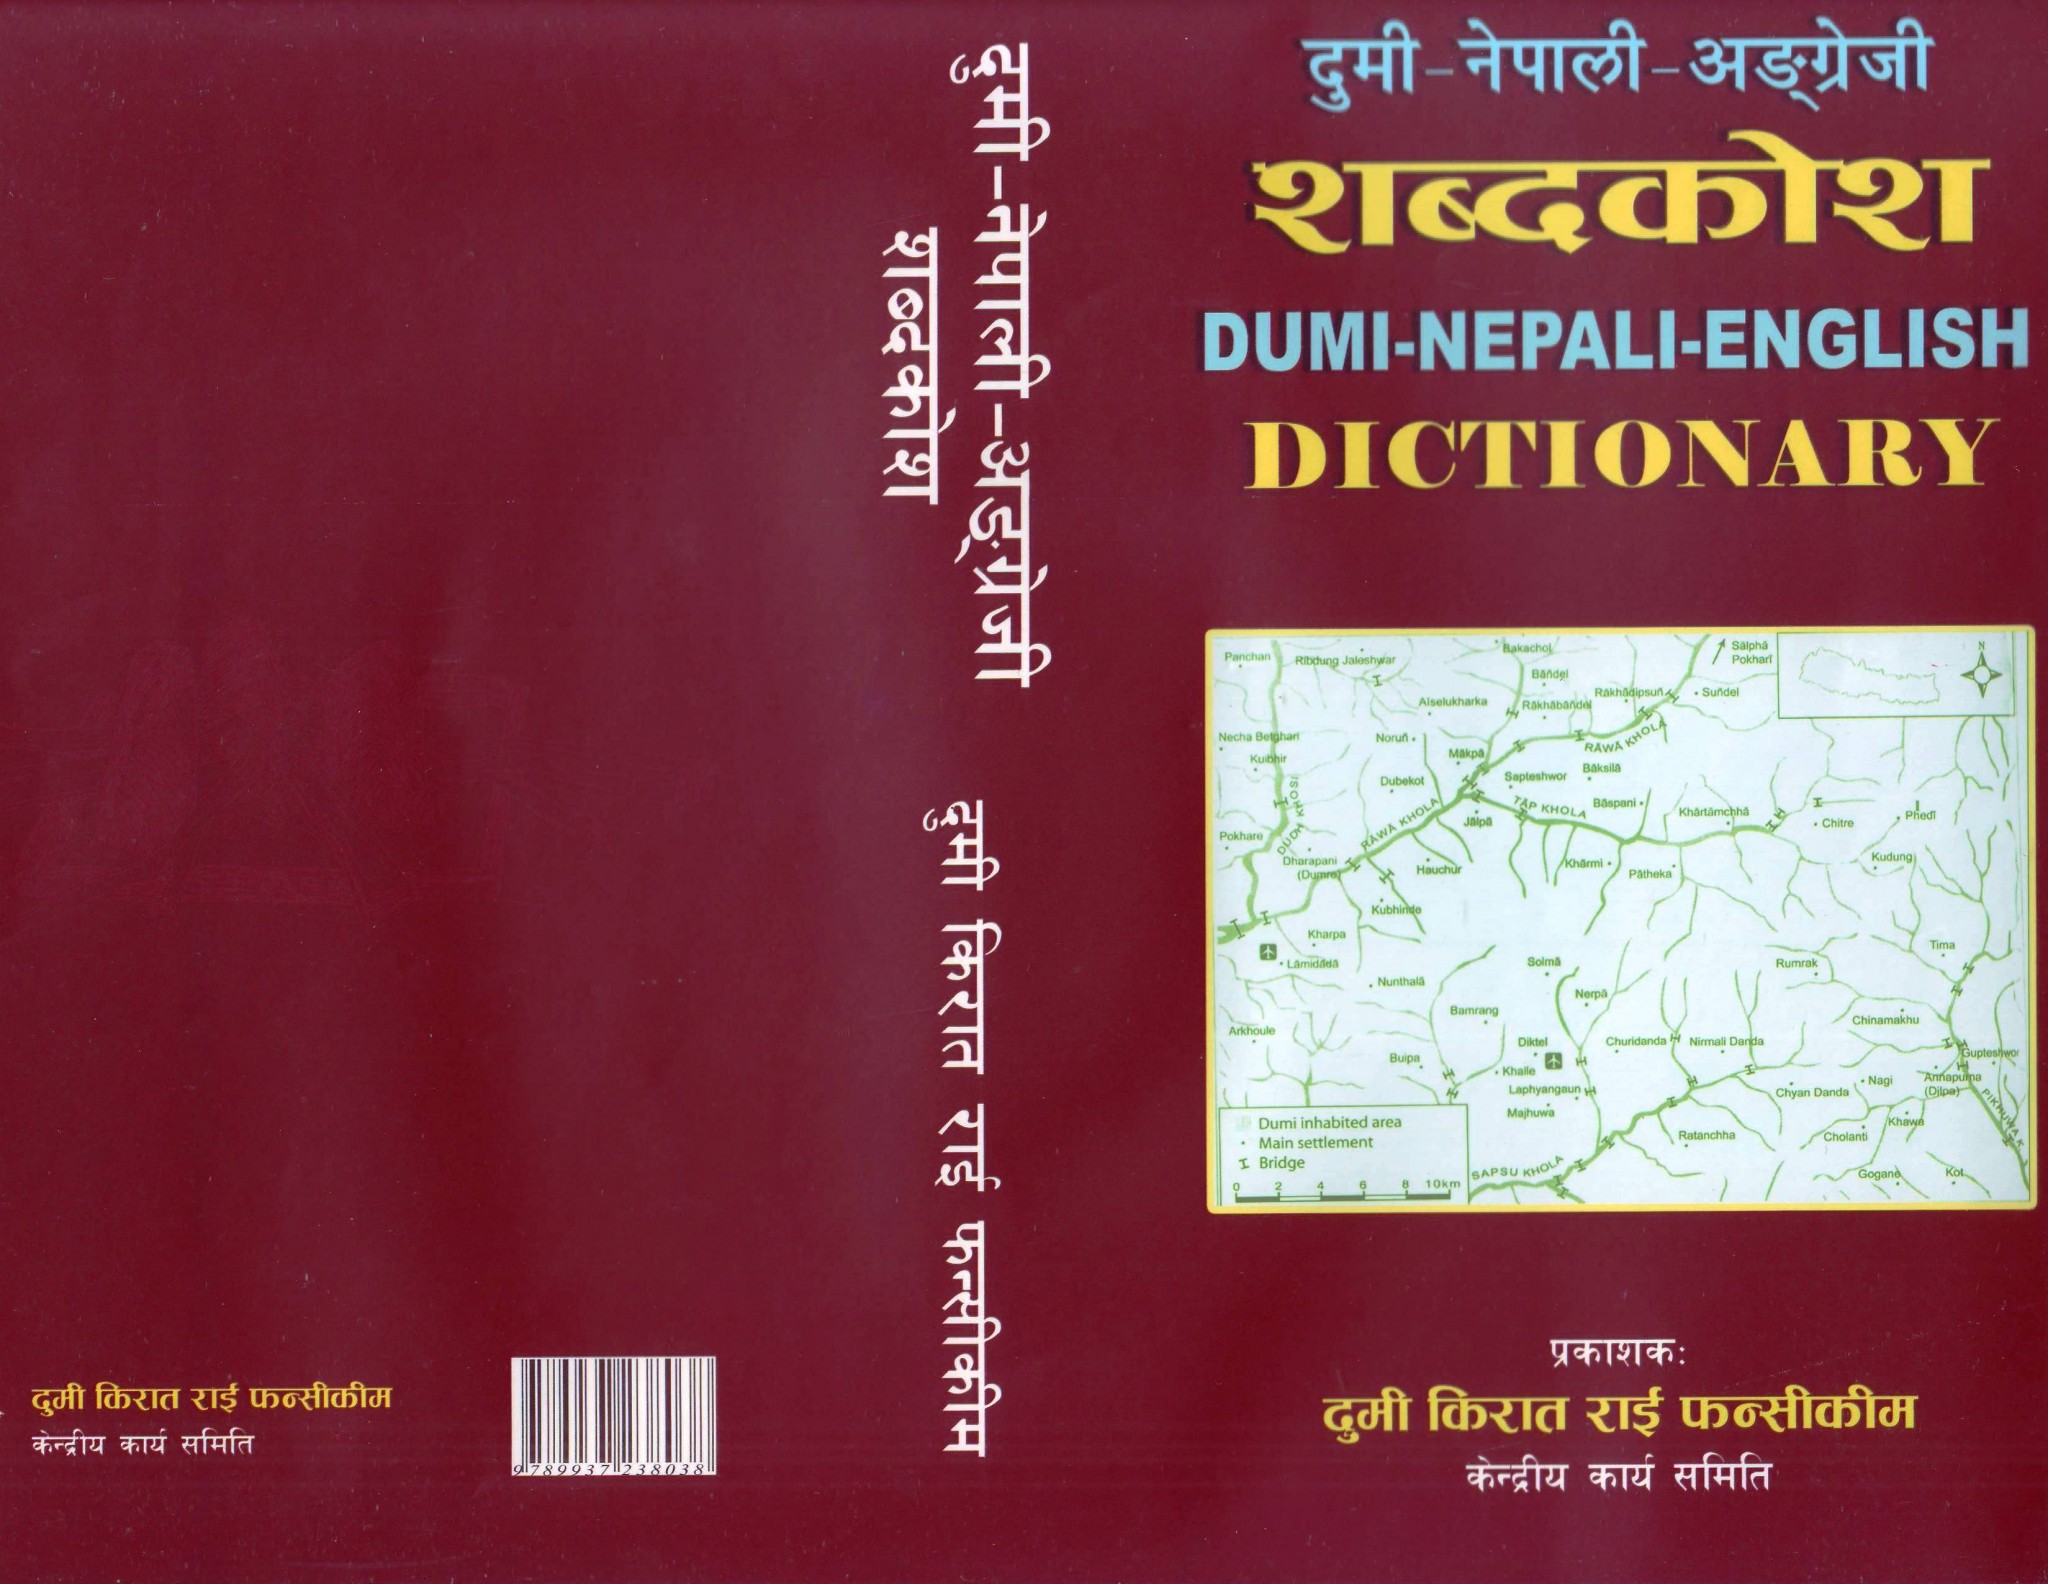 DictionaryCover